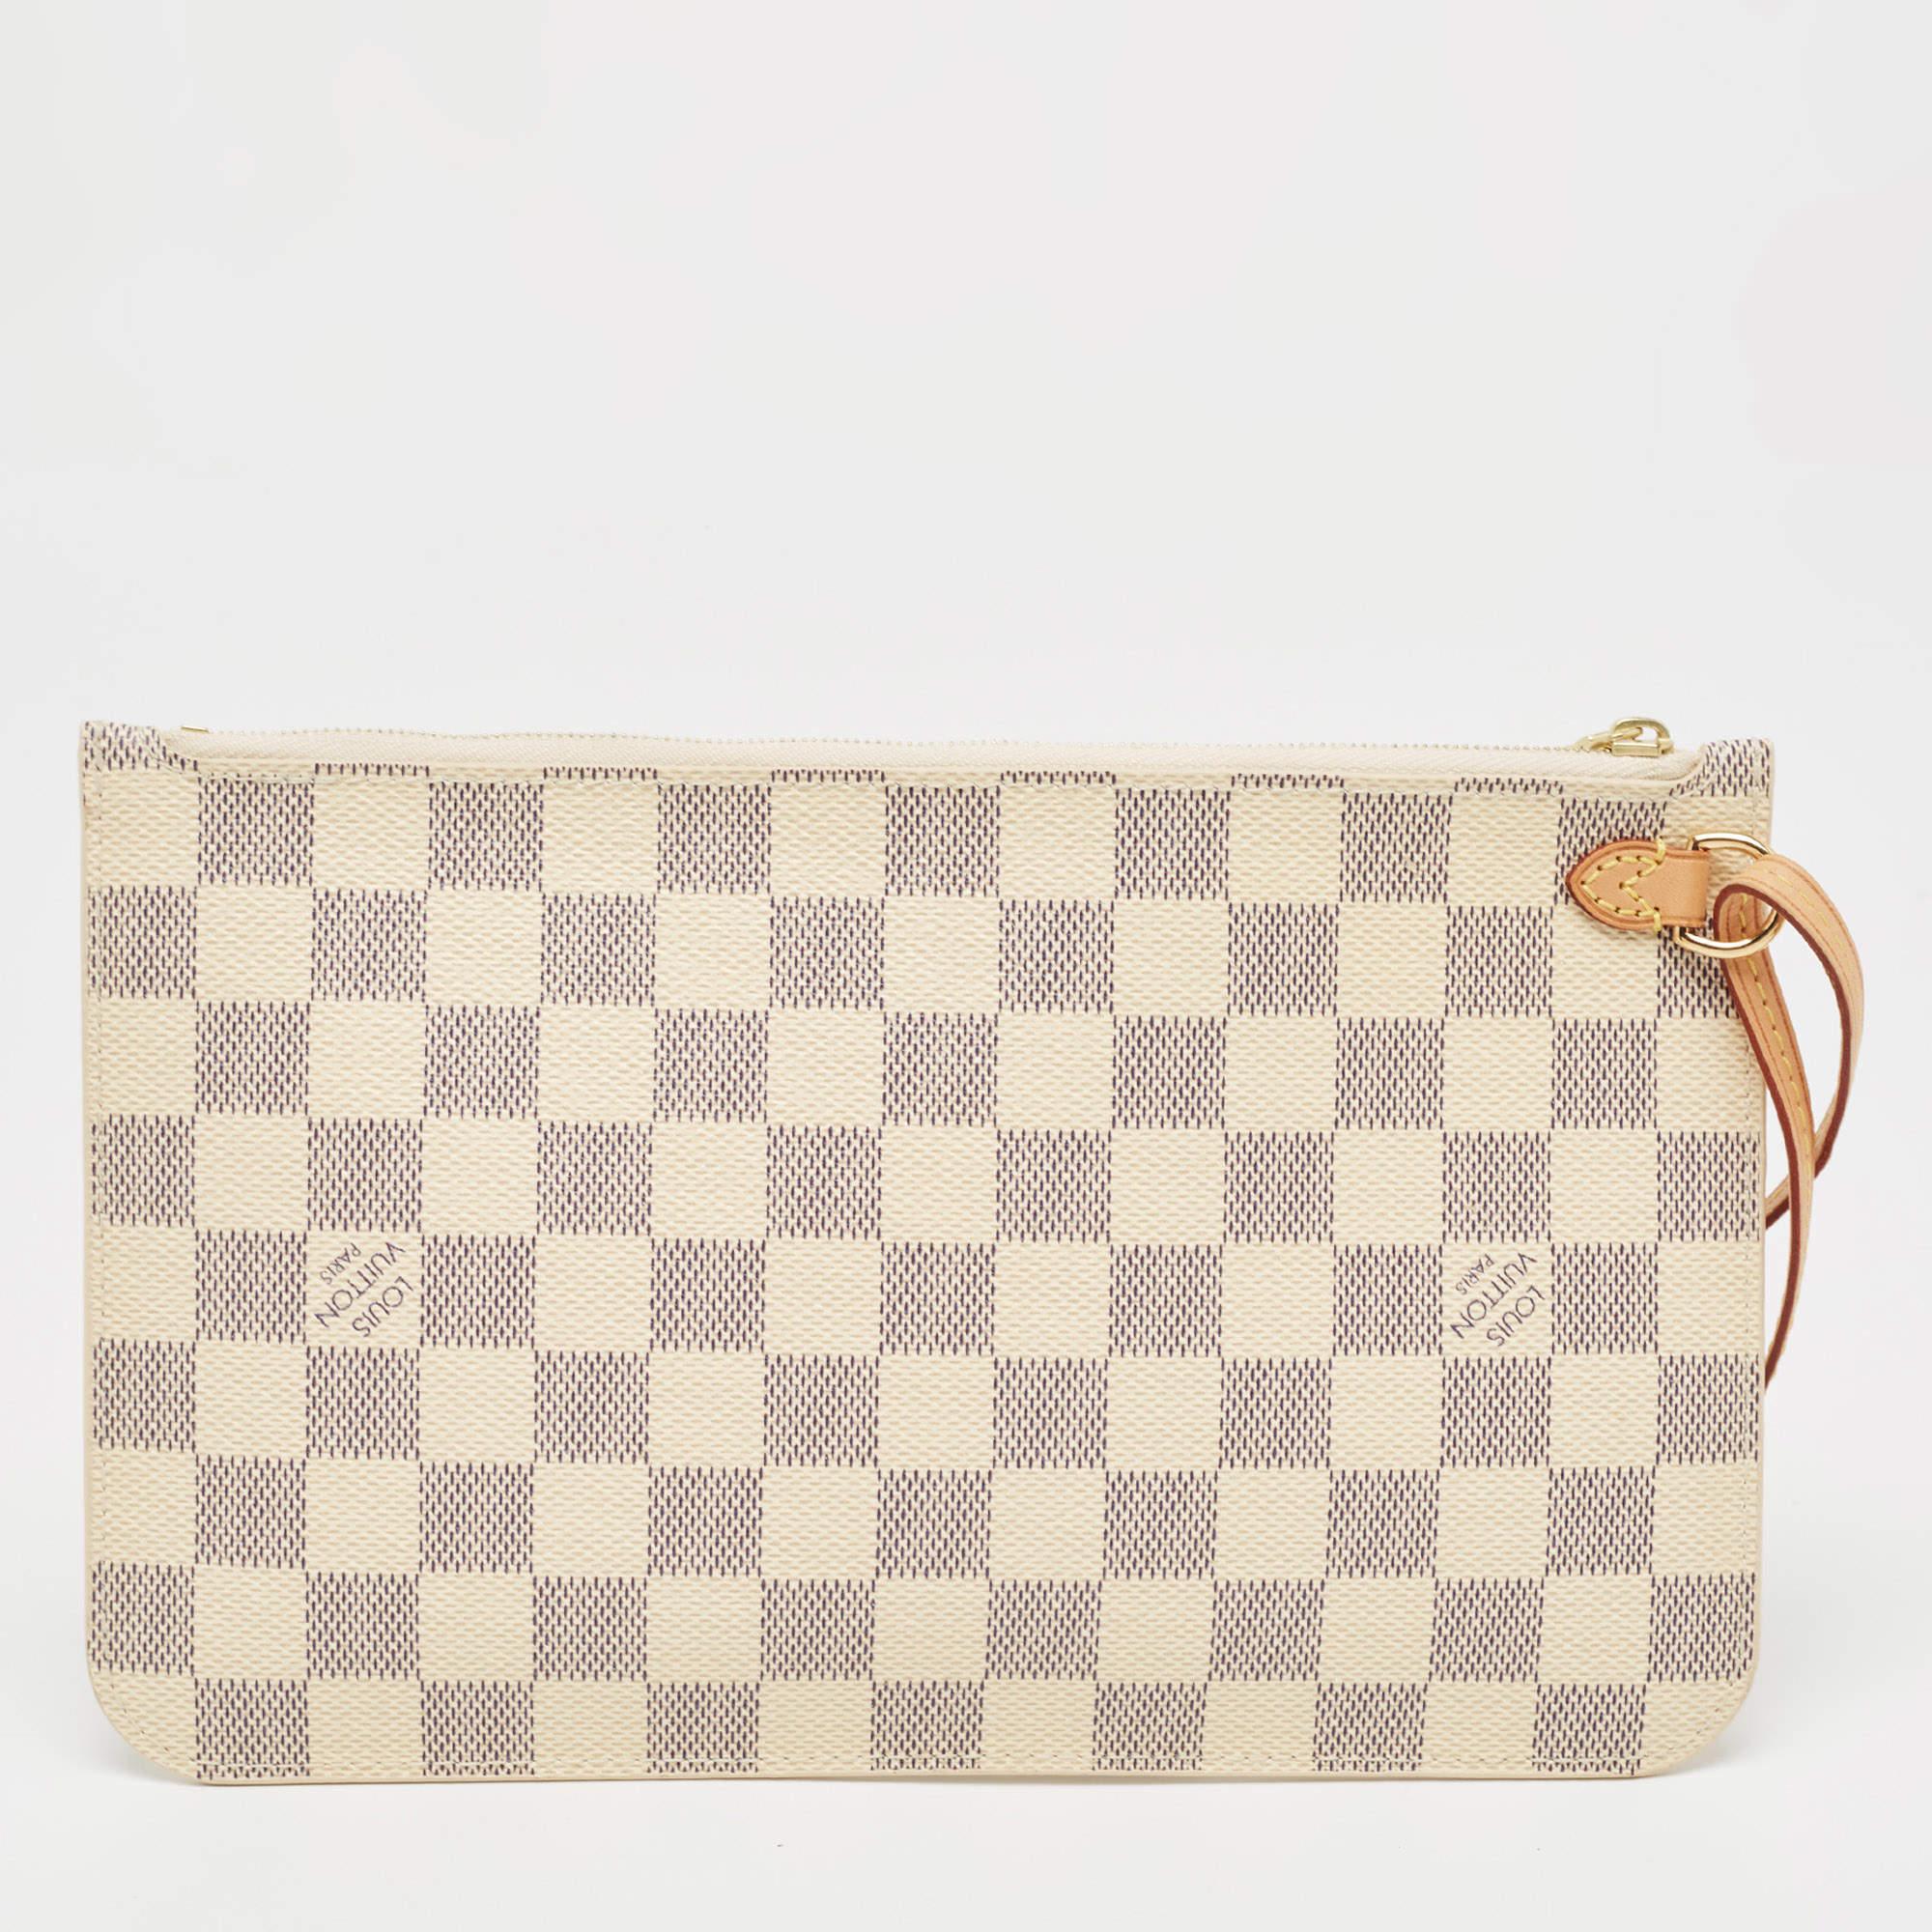 The exclusive Neverfull pochette from the house of Louis Vuitton is a stylish way to carry your basics. The pochette is crafted from the signature Damier Azur canvas body that imparts grace, while the gold-tone top zip closure adds the perfect